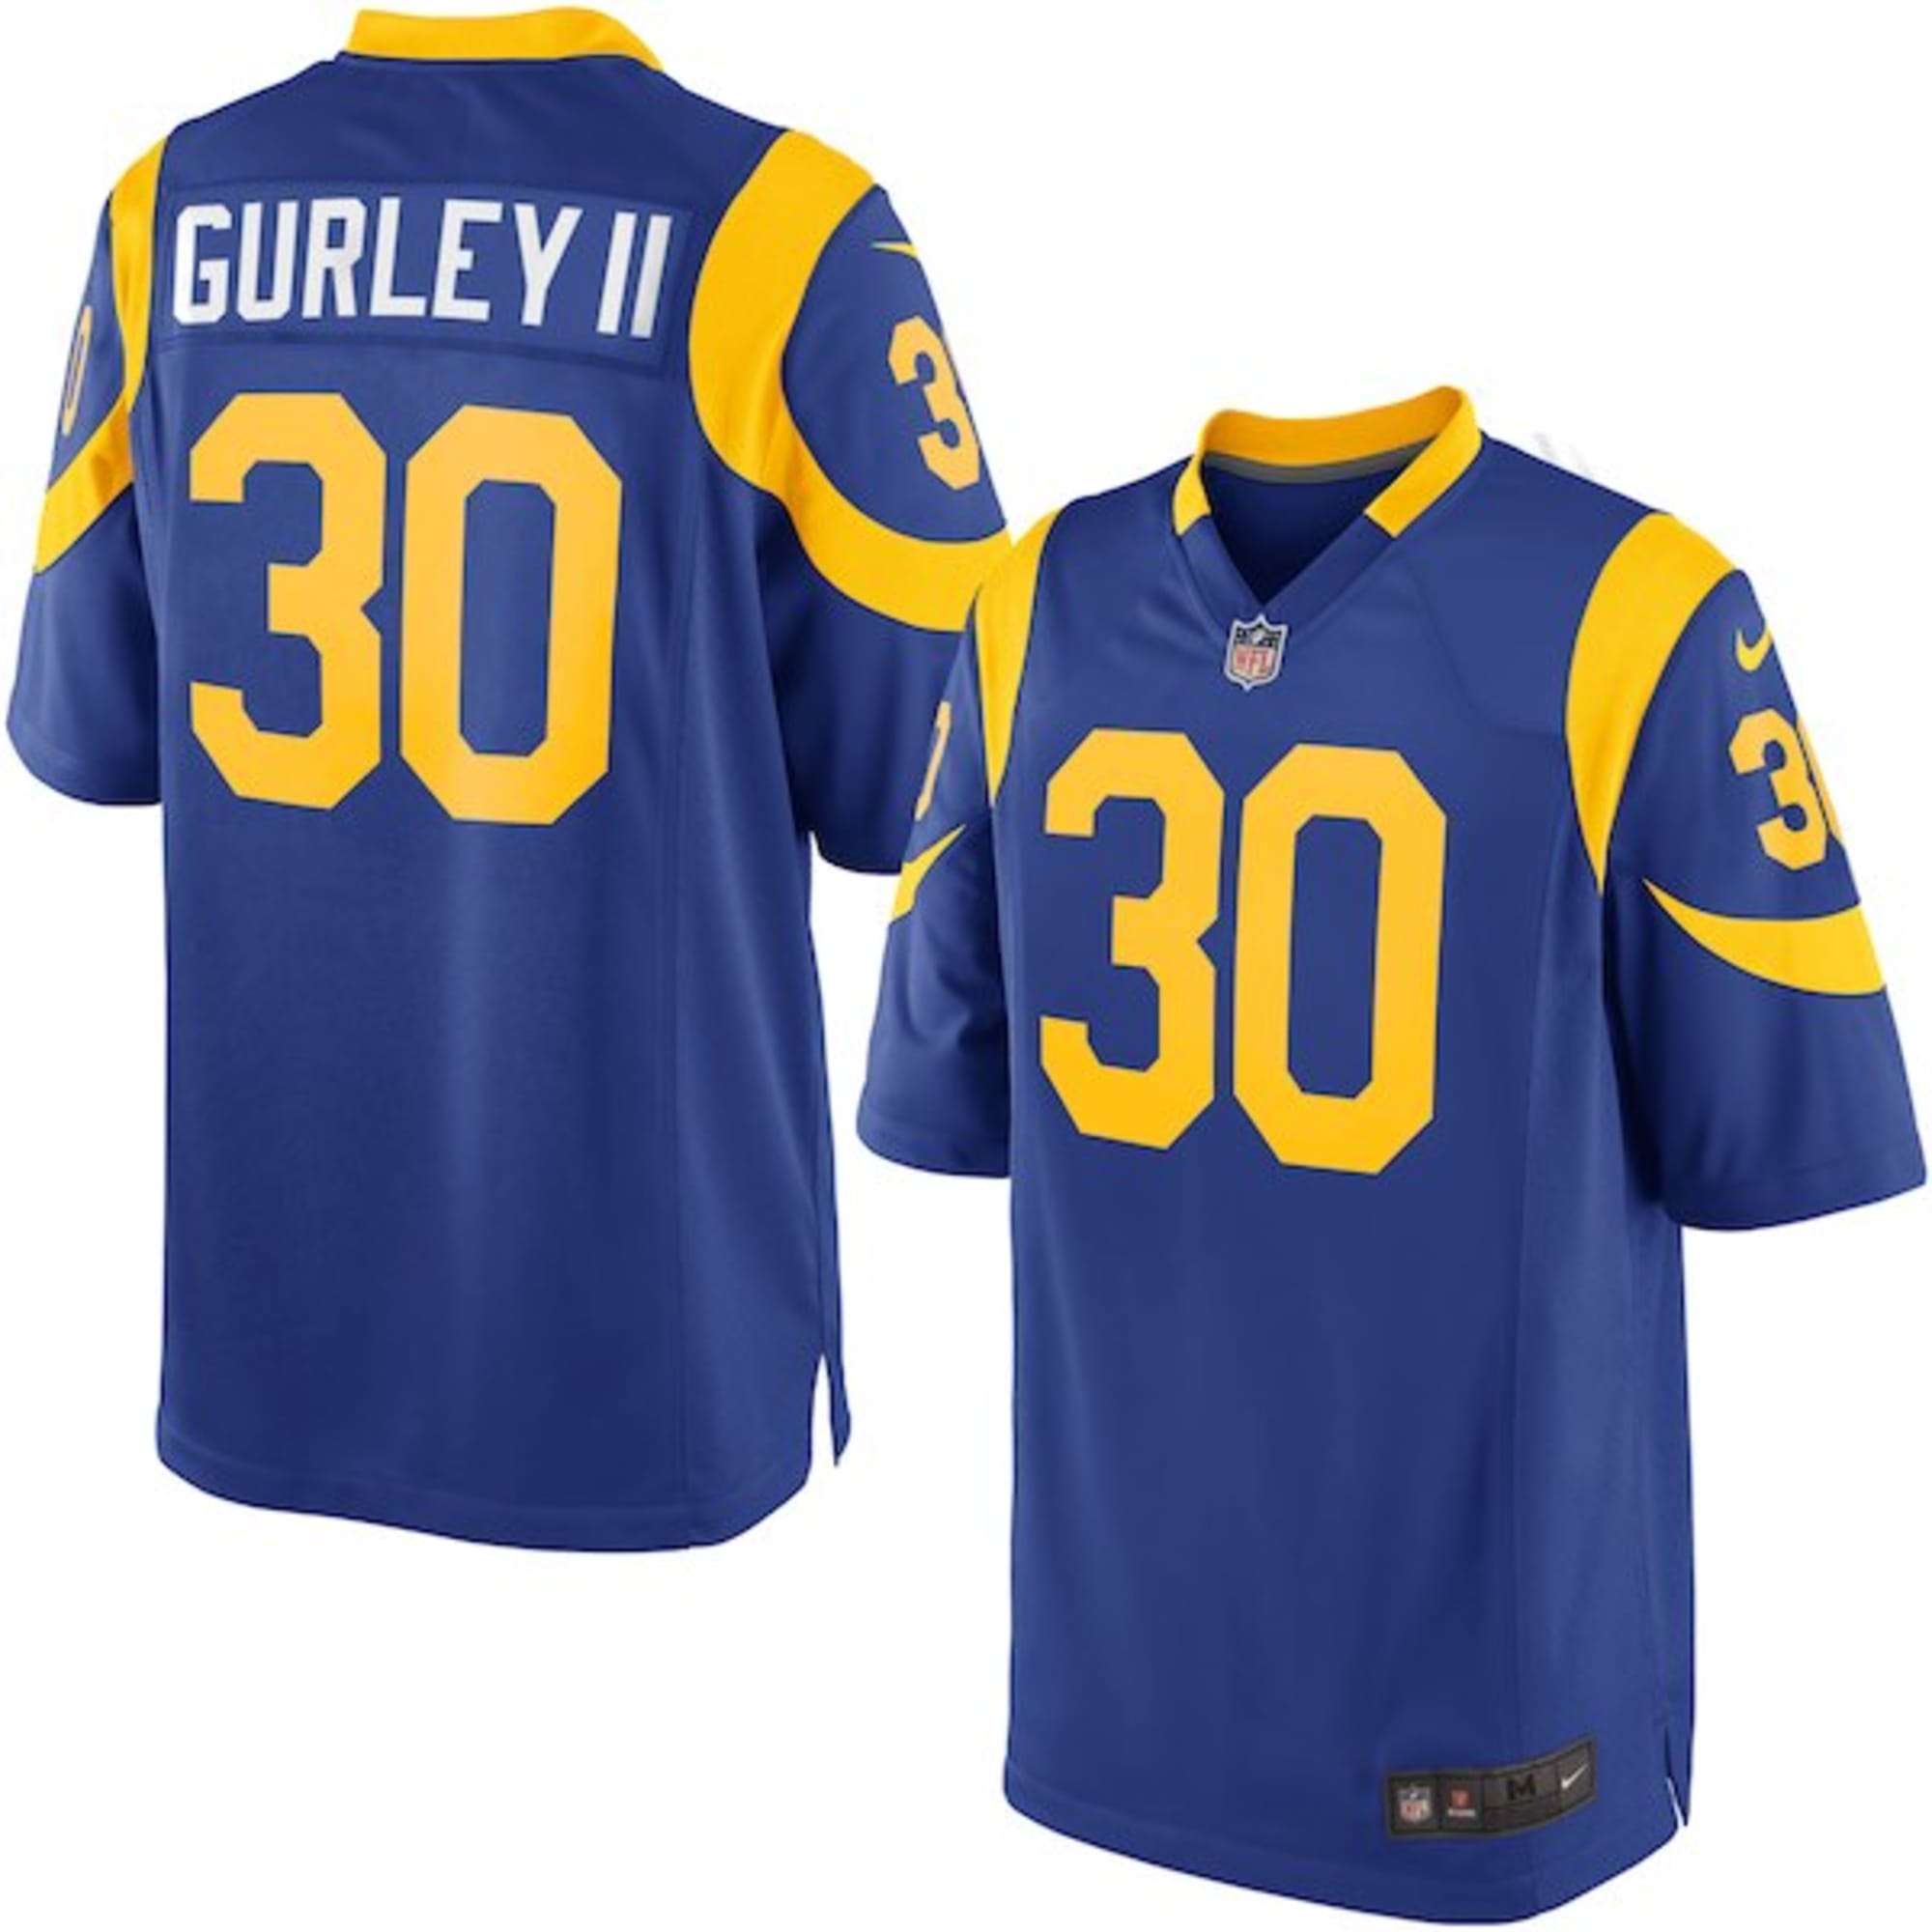 Must-have Los Angeles Rams items for 